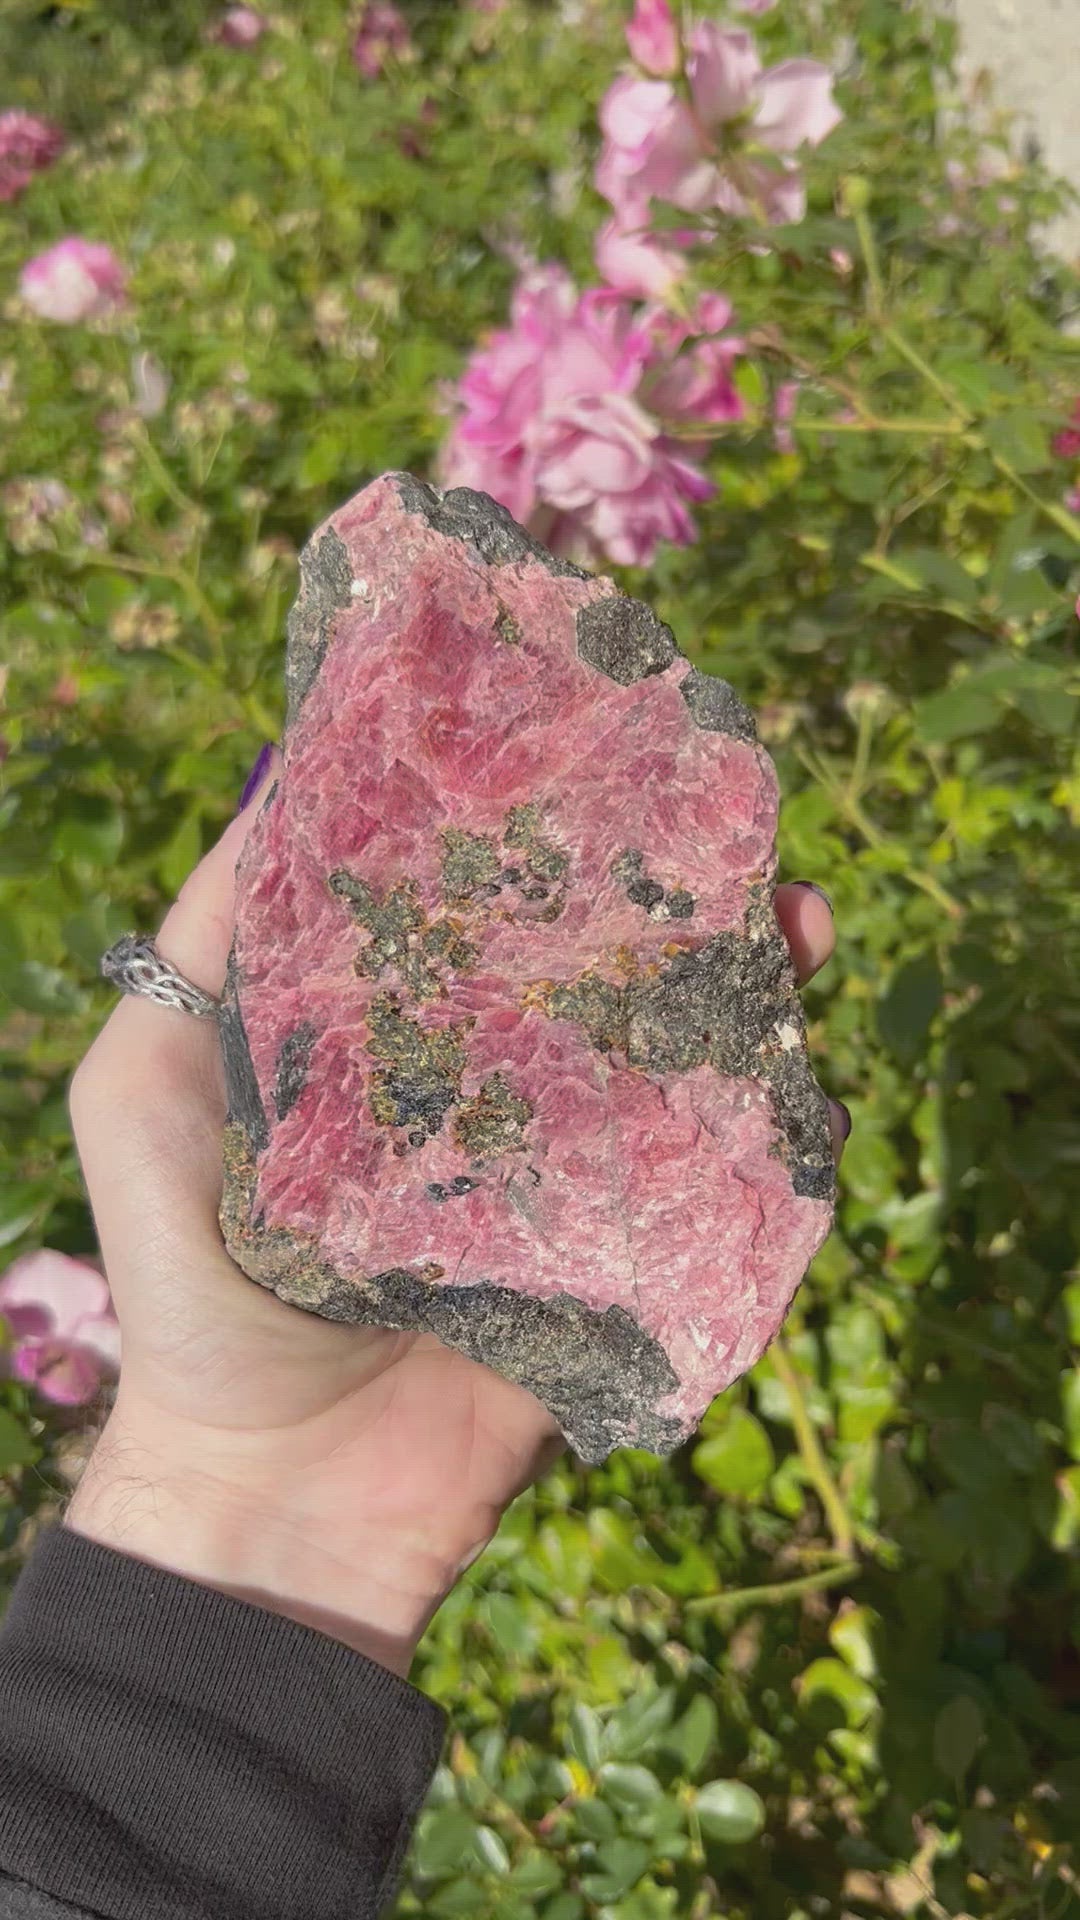 video of rhodonite stone in hand with floral background